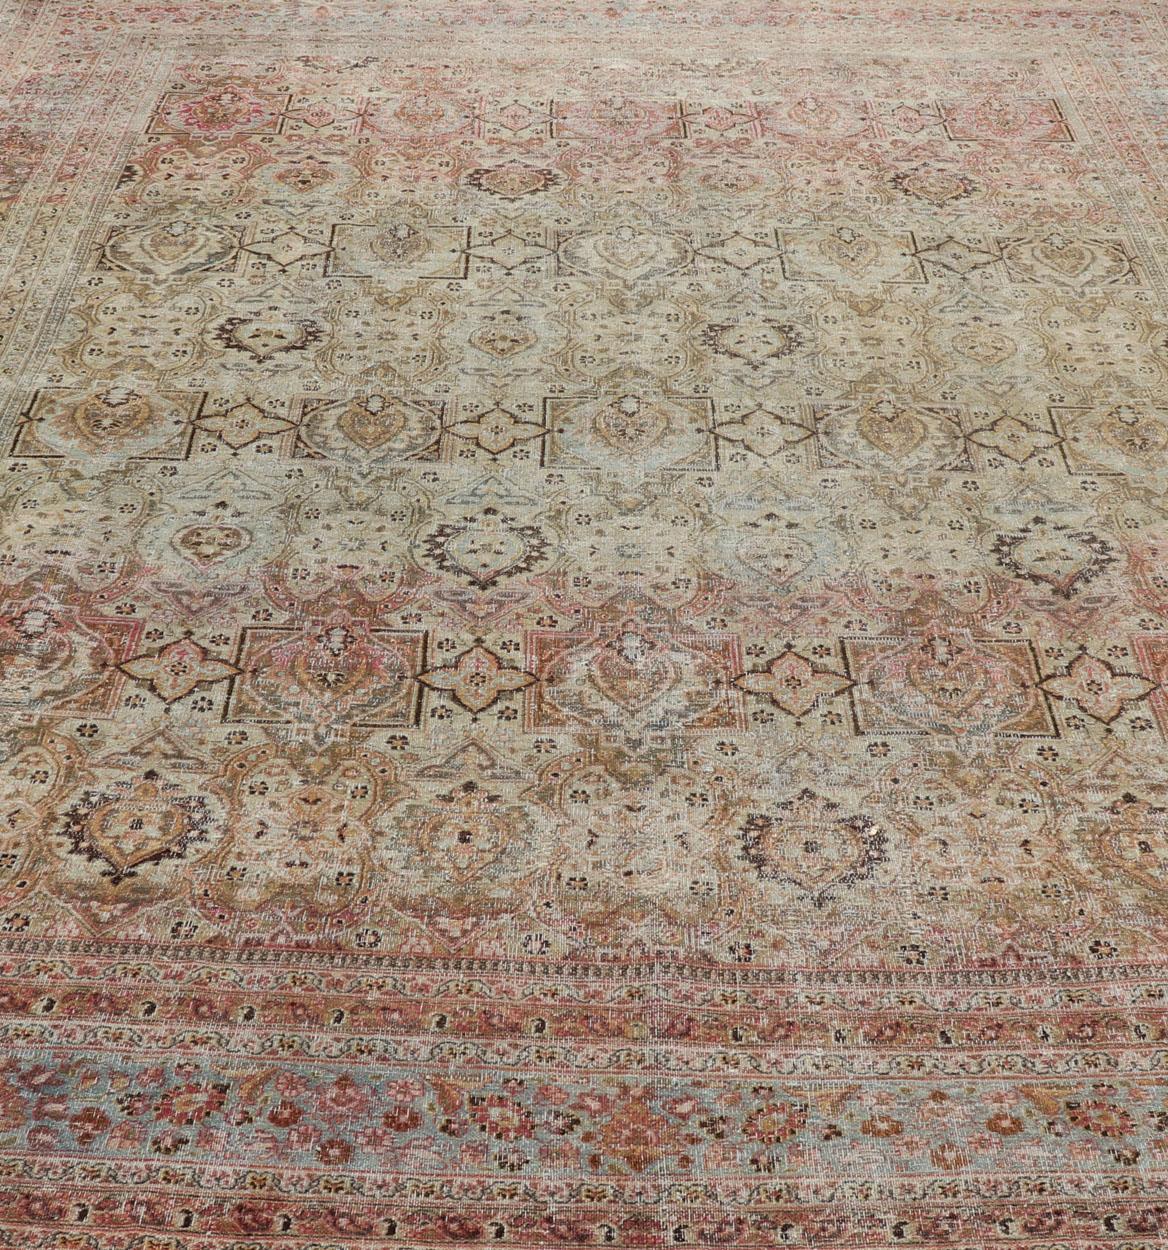  Antique Persian Khorassan Rug with Palmettes, Geometric Flowers in Soft Tones For Sale 1